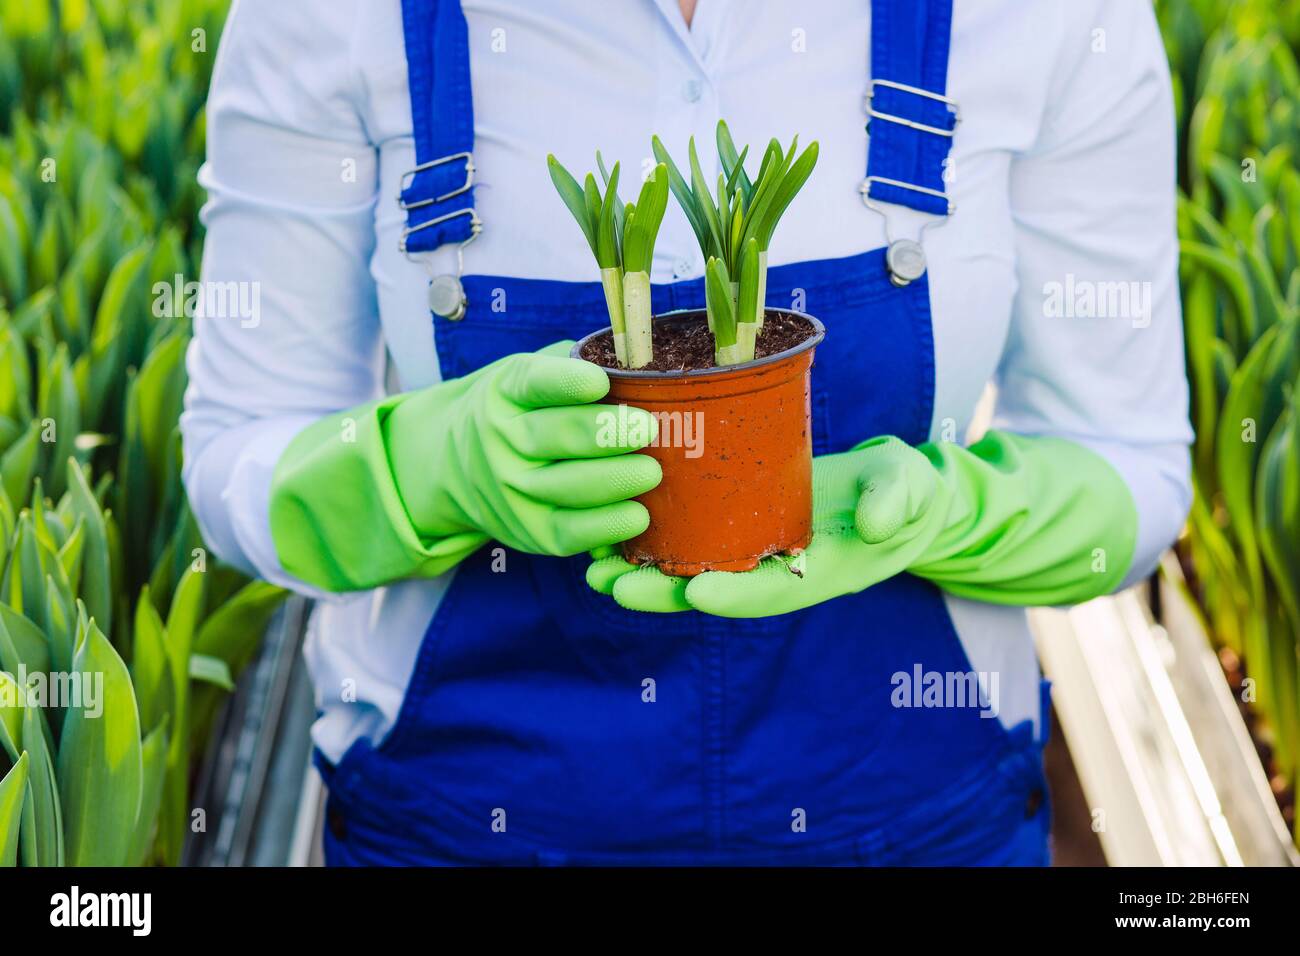 gardener hands wearing gloves, holding a pot plant. Growing flowers Stock Photo